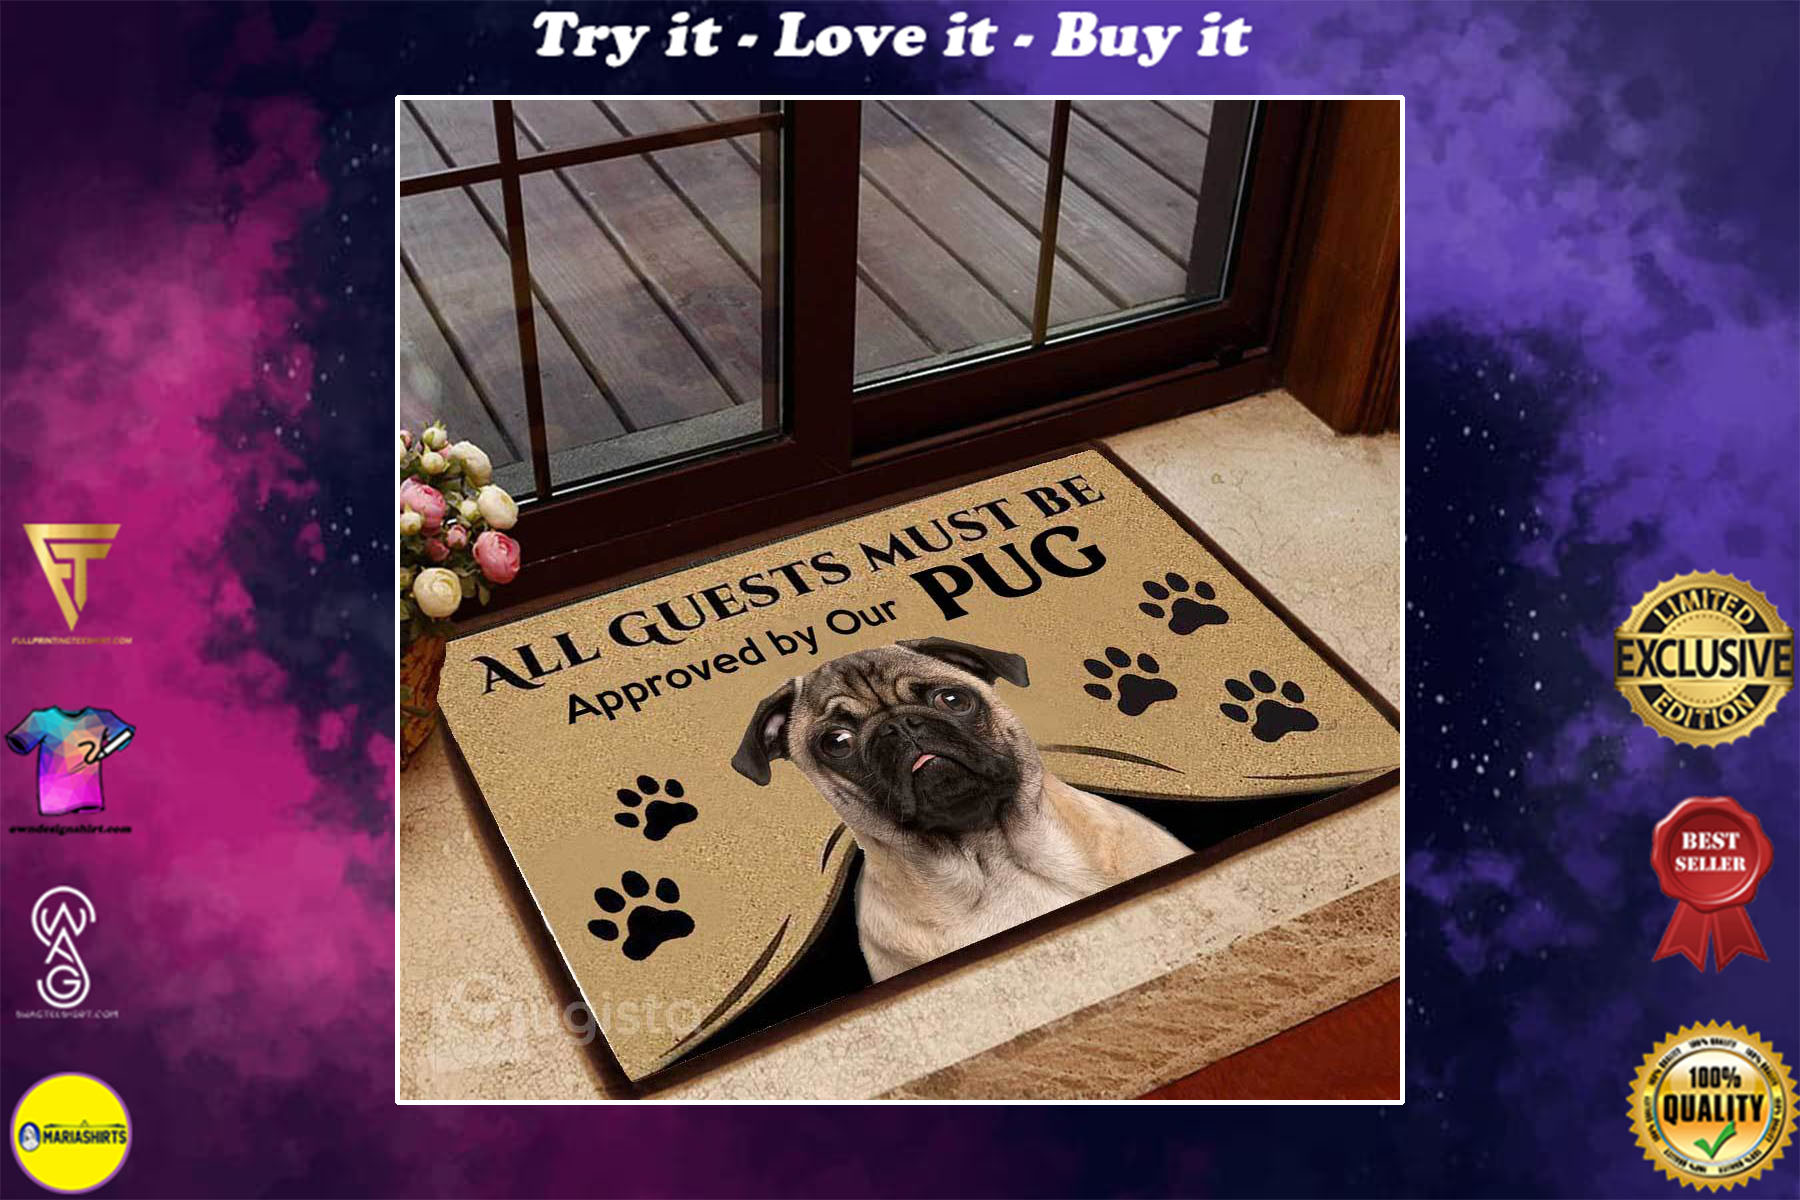 all guests must be approved by our pug doormat